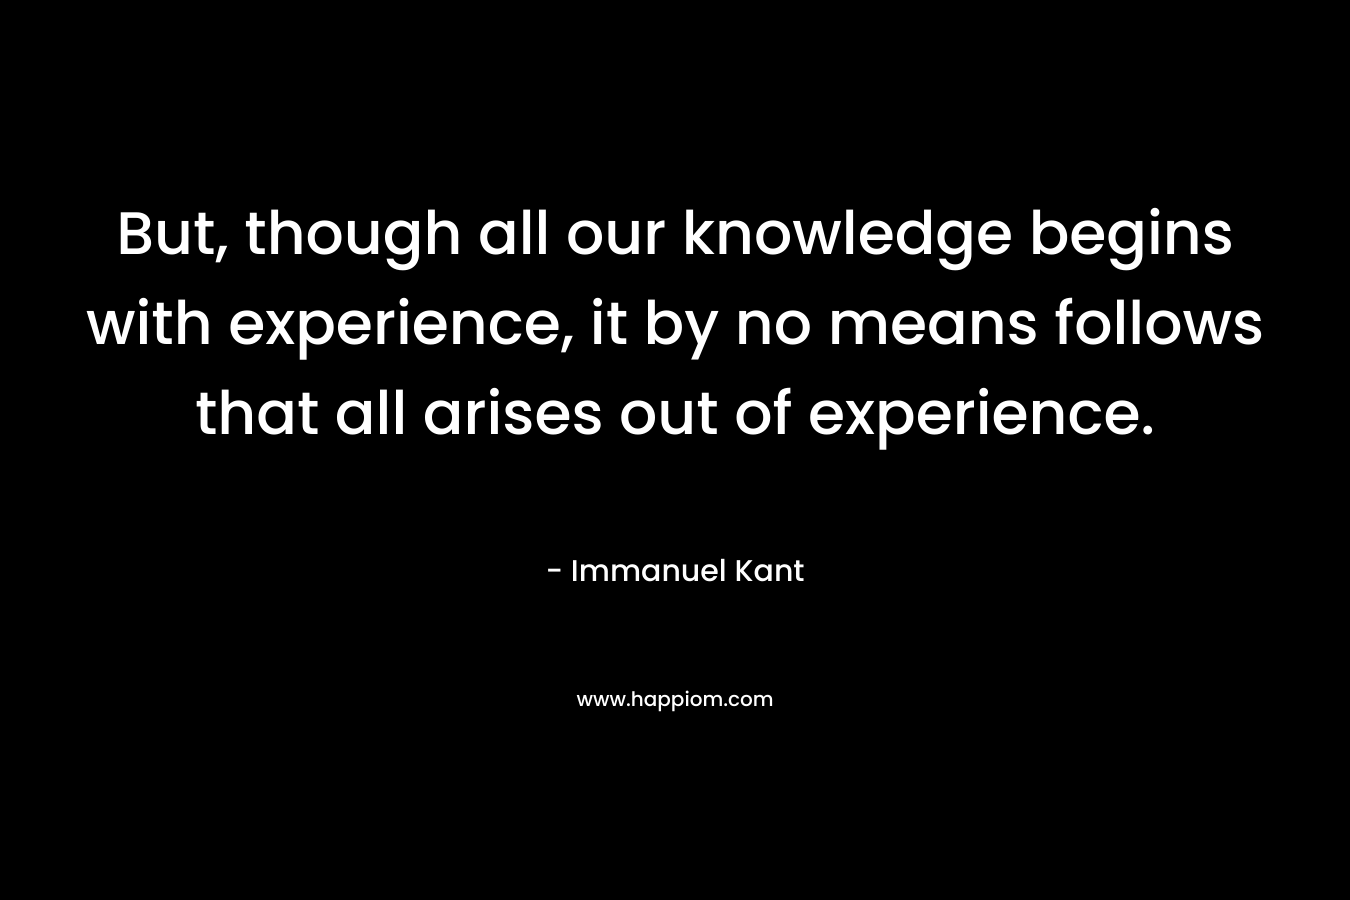 But, though all our knowledge begins with experience, it by no means follows that all arises out of experience.